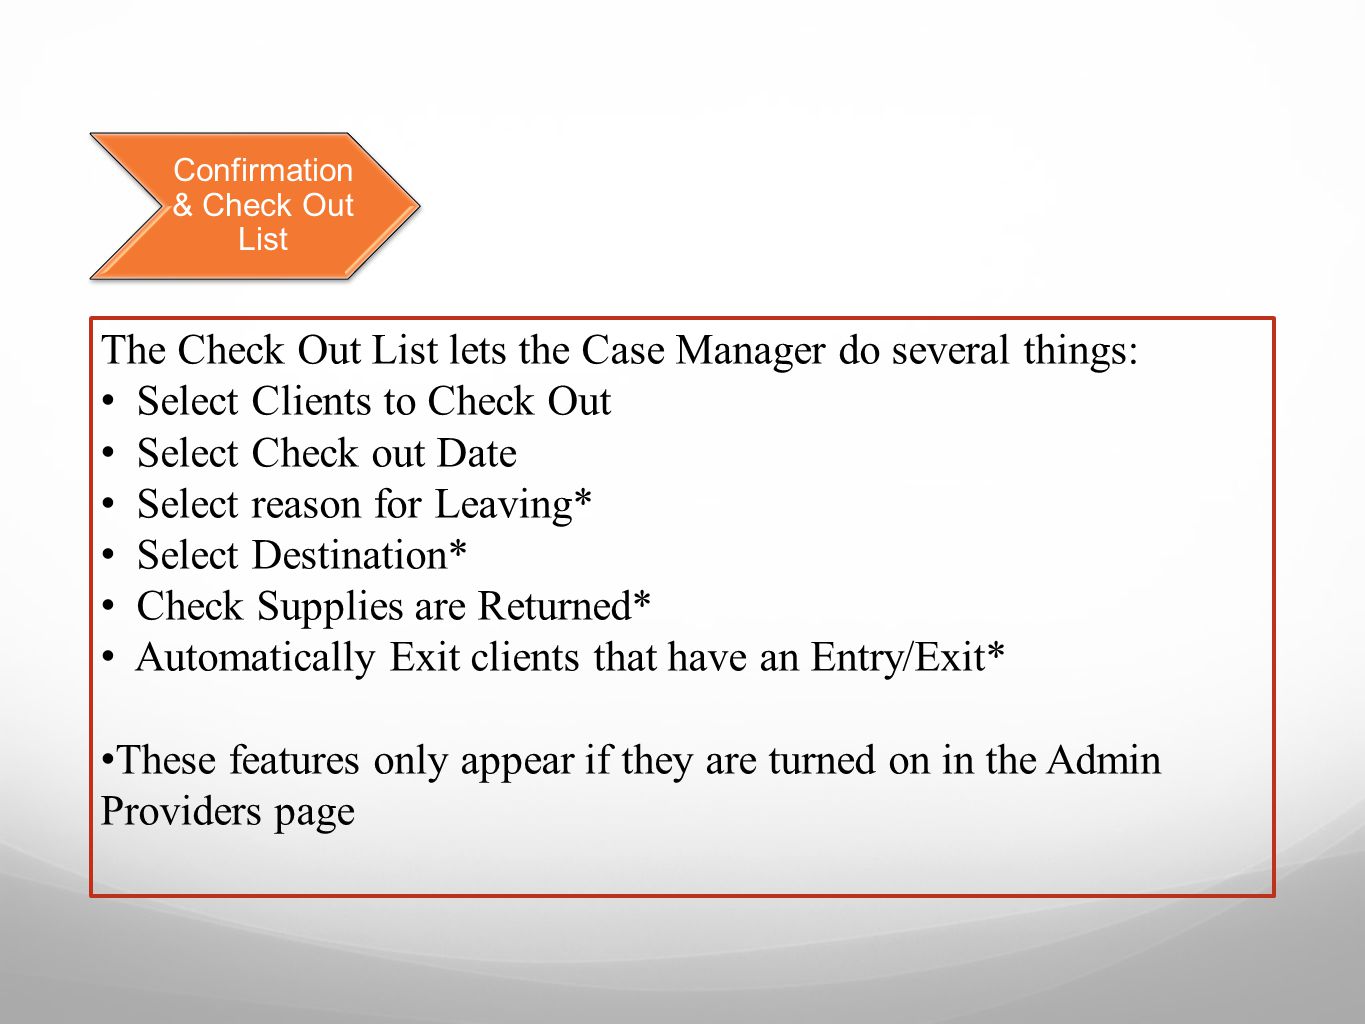 Confirmation & Check Out List The Check Out List lets the Case Manager do several things: Select Clients to Check Out Select Check out Date Select reason for Leaving* Select Destination* Check Supplies are Returned* Automatically Exit clients that have an Entry/Exit* These features only appear if they are turned on in the Admin Providers page